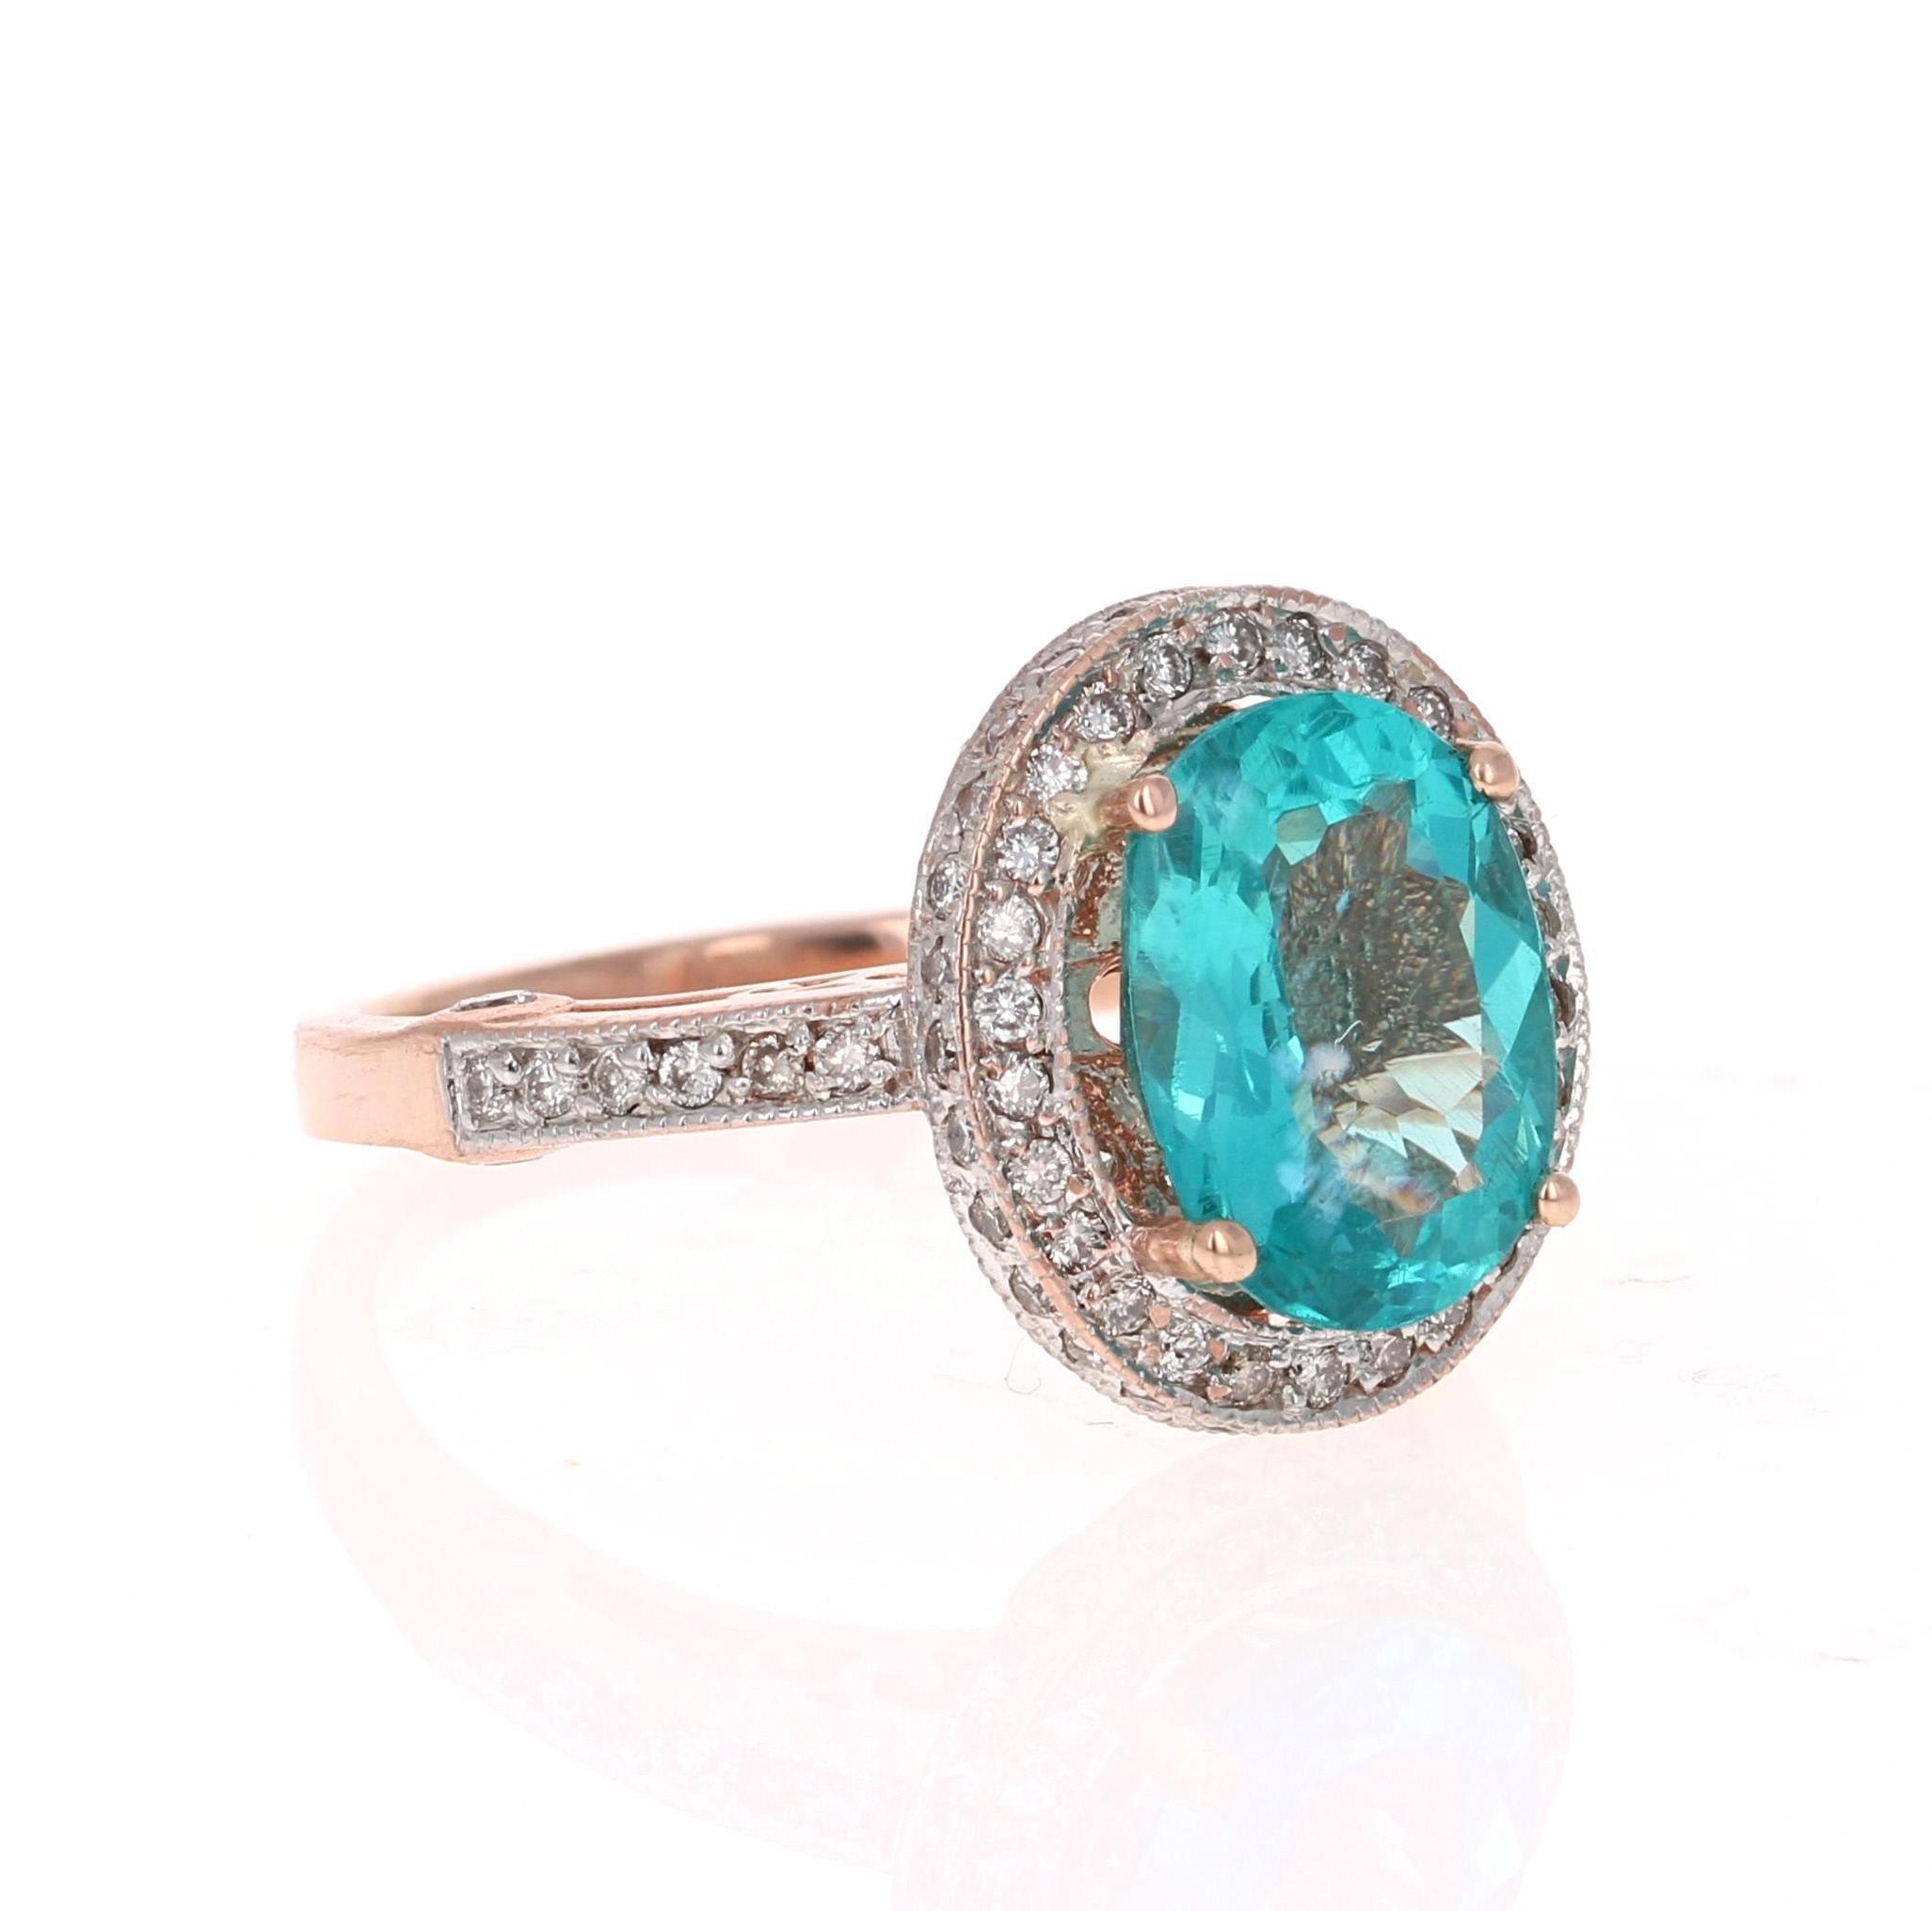 Apatites are found in various places around the world including Myanmar, Kenya, India, Brazil, Sri Lanka, Norway, Mexico and the USA. The sea blue color of Apatite is considered top grade and is desired by many. It is a great alternate to the highly